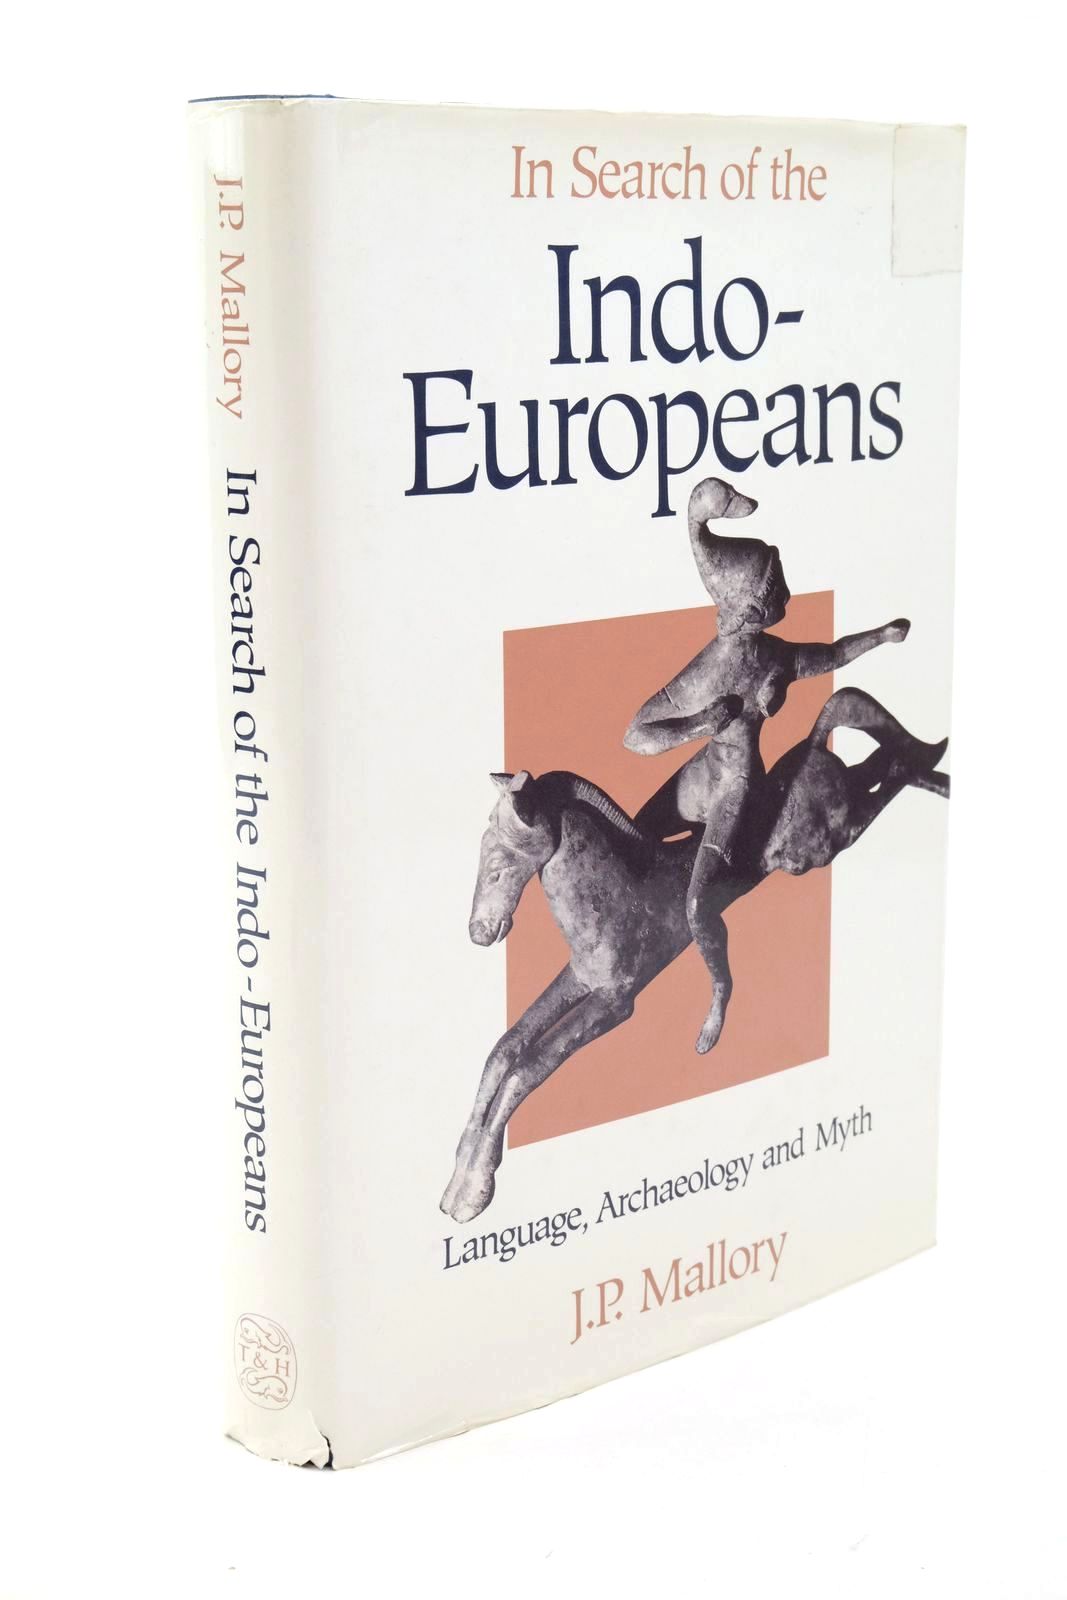 Photo of IN SEARCH OF THE INDO-EUROPEANS written by Mallory, J.P. published by Thames and Hudson (STOCK CODE: 1322647)  for sale by Stella & Rose's Books